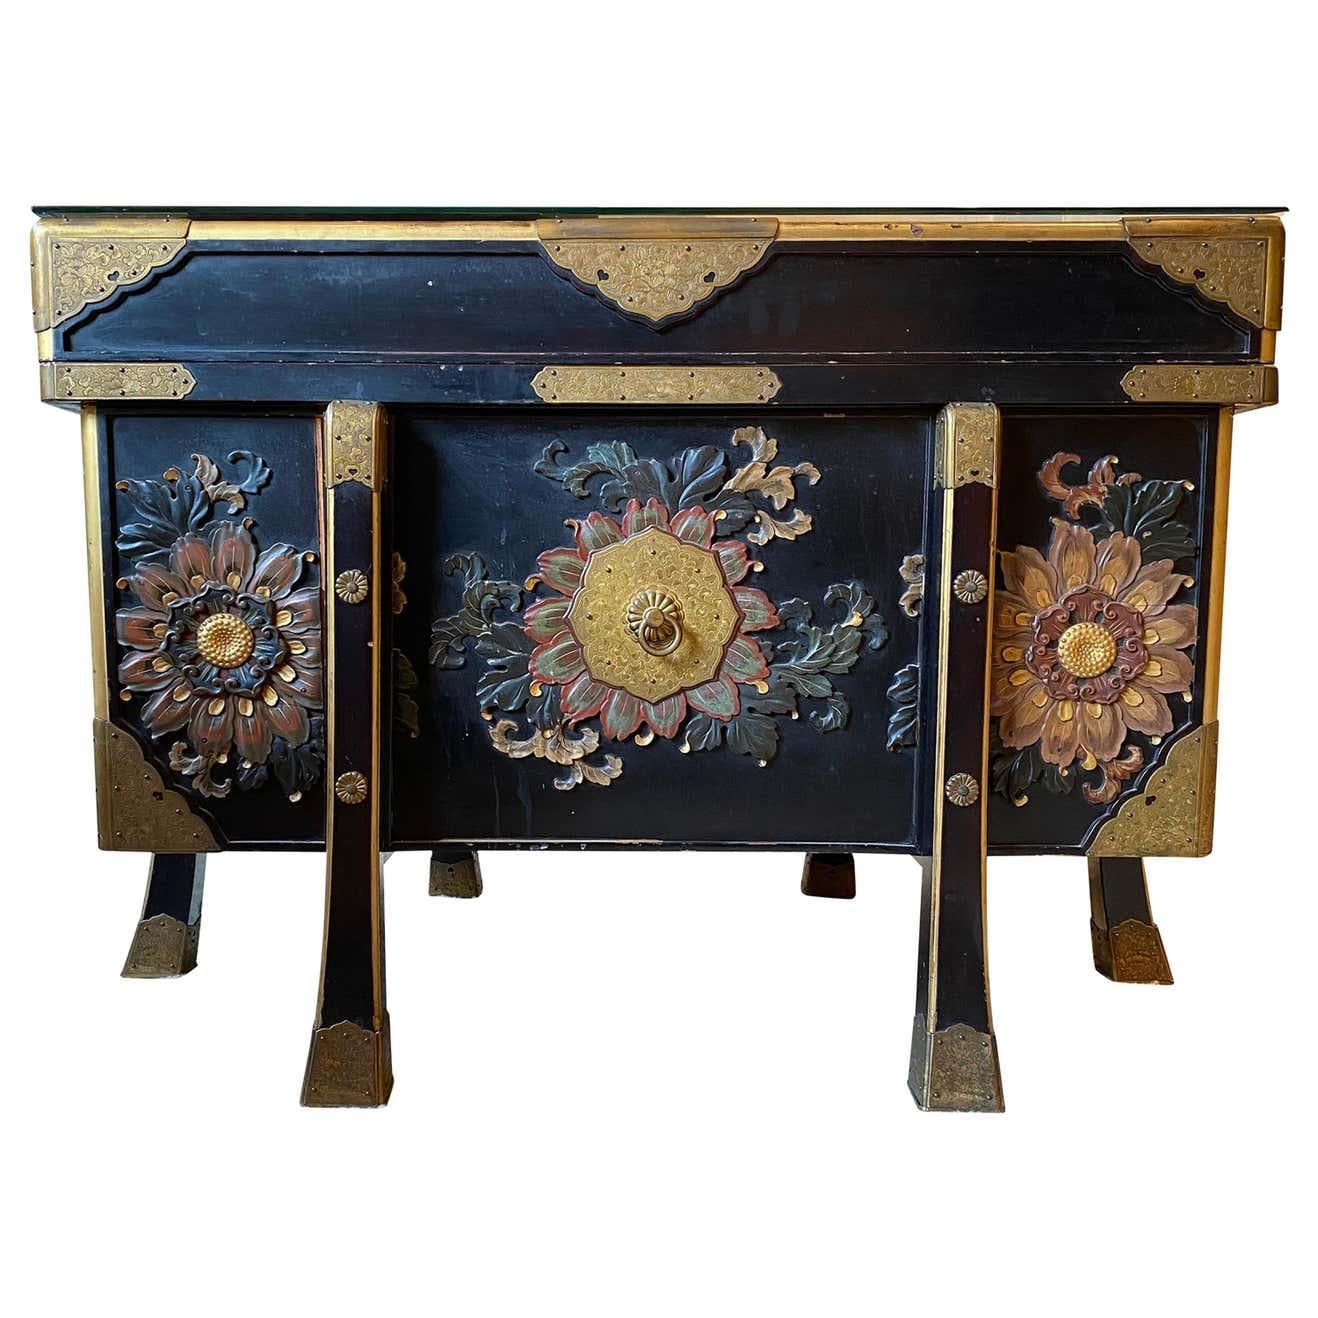 An absolutely stunning large Japanese black lacquered storage chest, 19th century. This chest is offered with superb hand carved wooden plum and cherry blossom flowers, and spectacular floral mounts. Positive meanings of flowers in China are Orchids